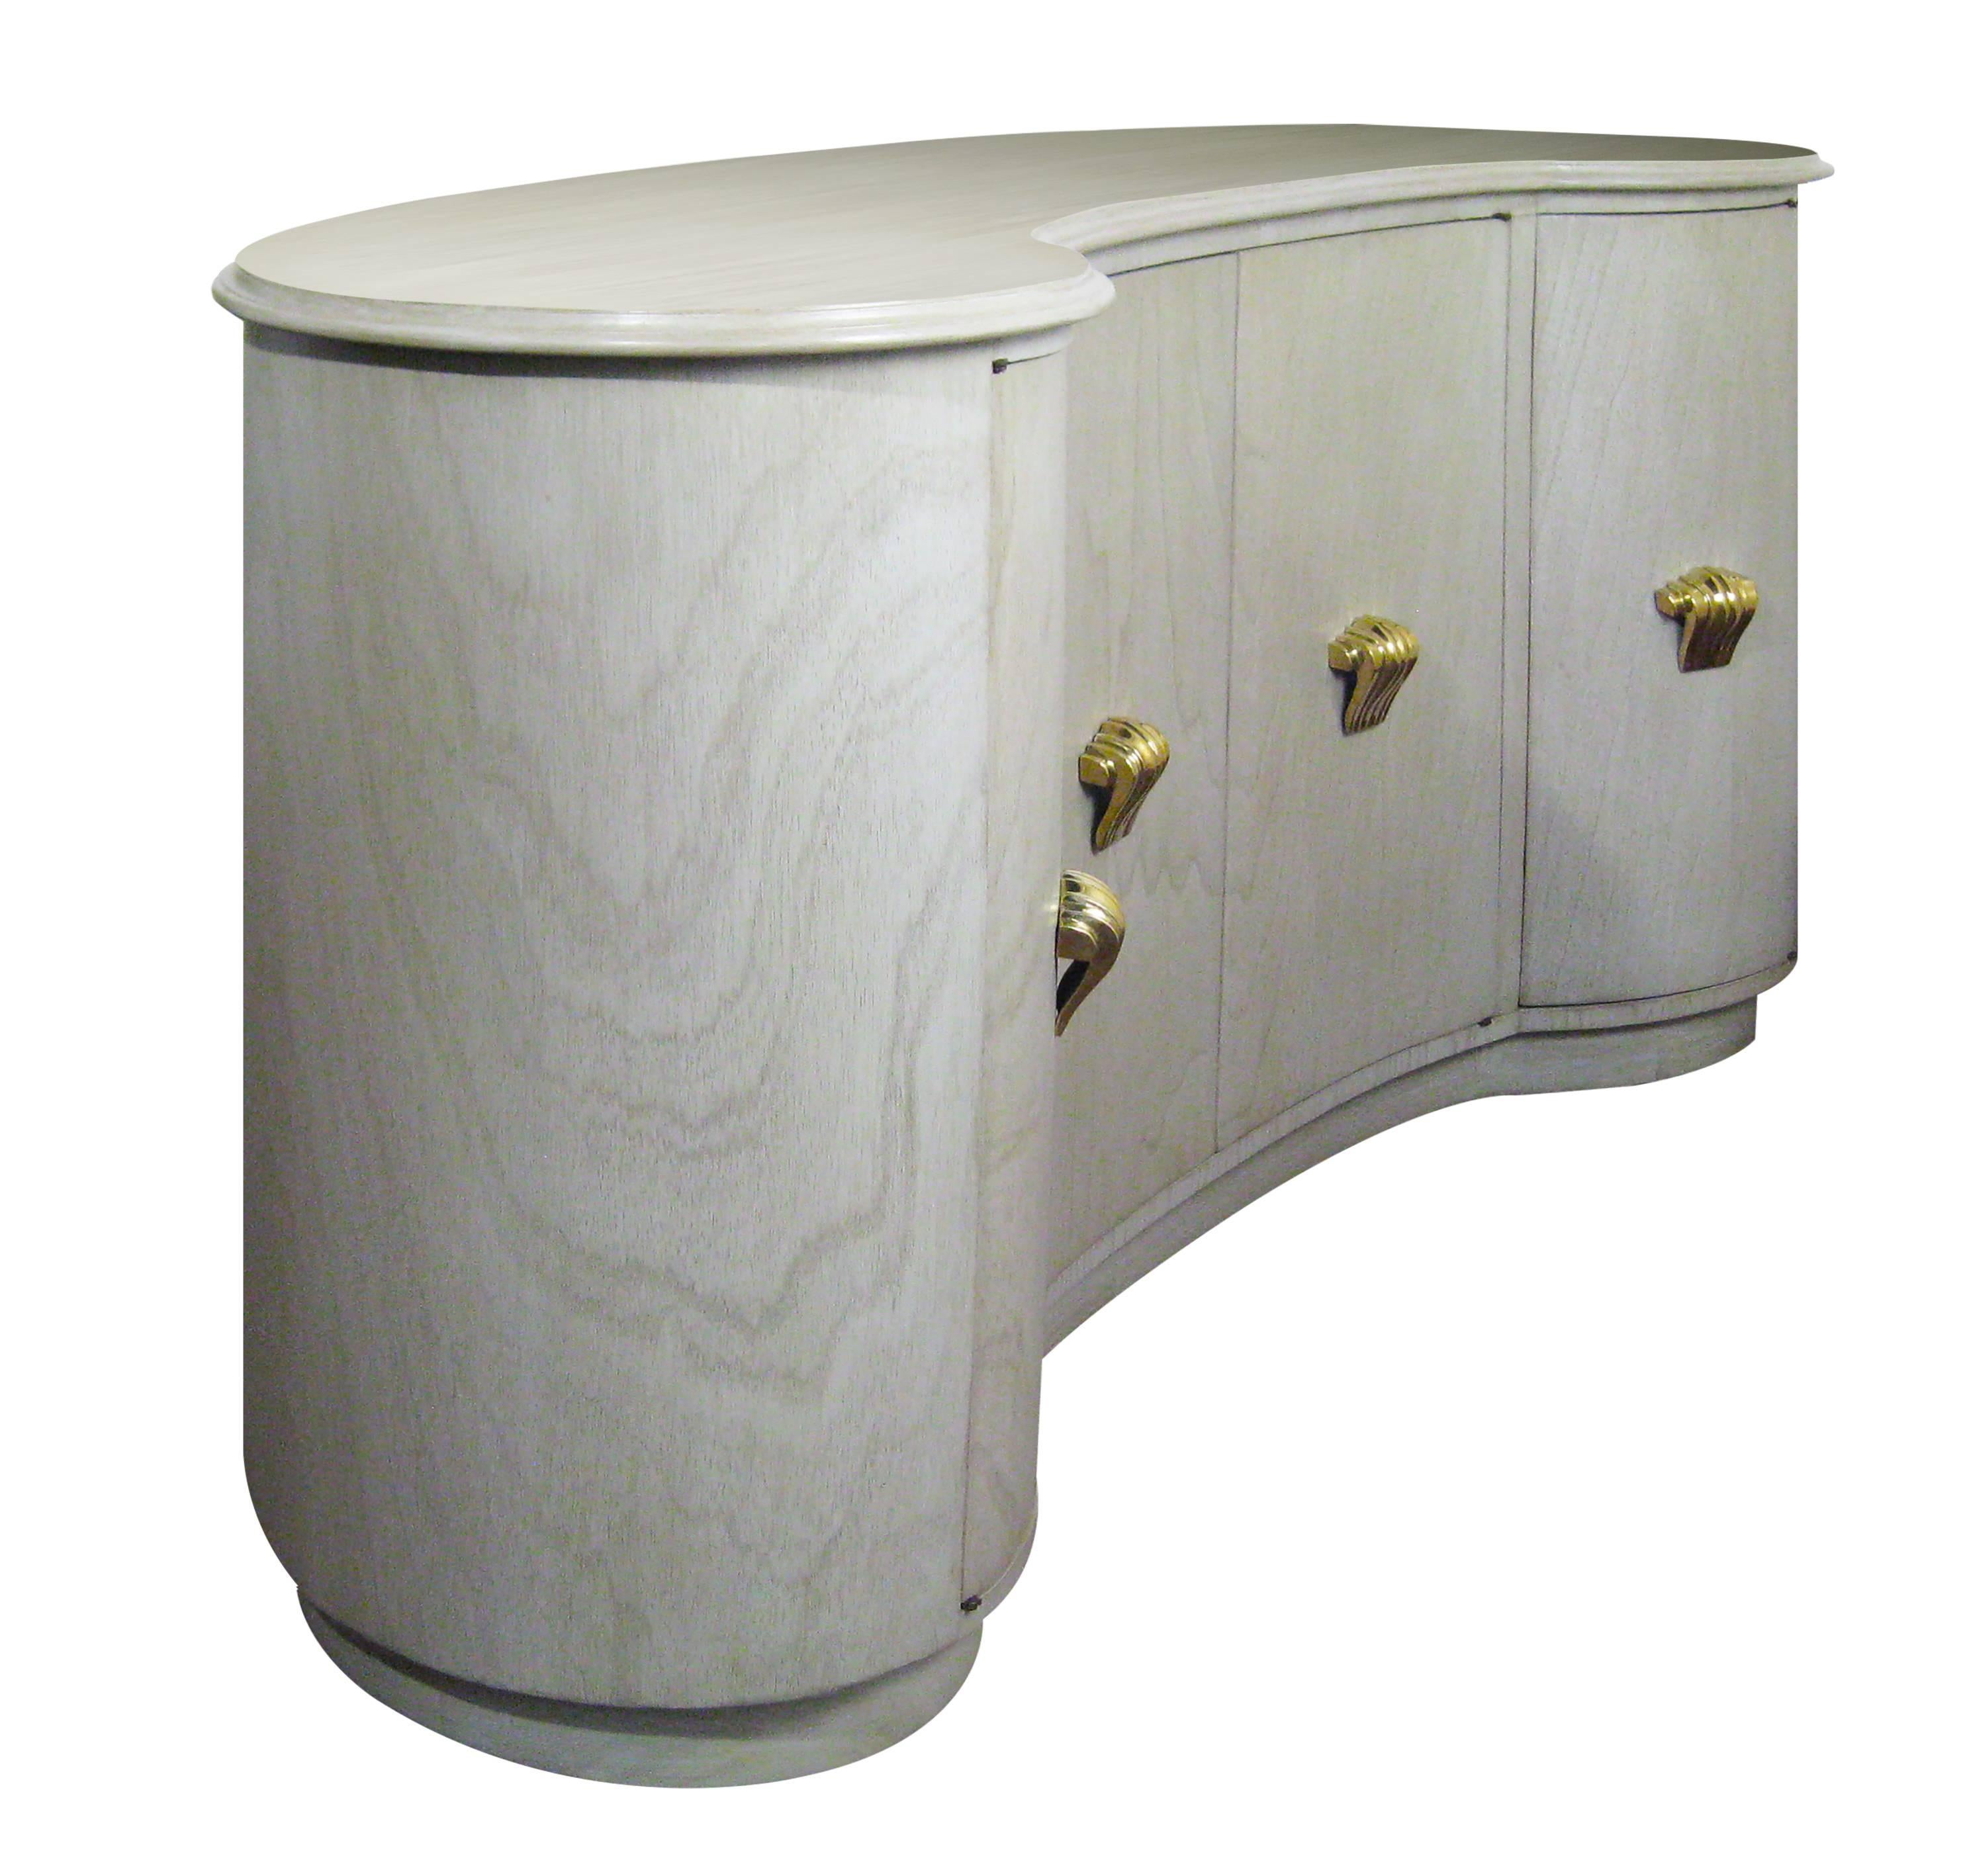 This charming buffet constructed in a delicate curve can (and should!) be exhibited from all angles. The finish is a cerused or 